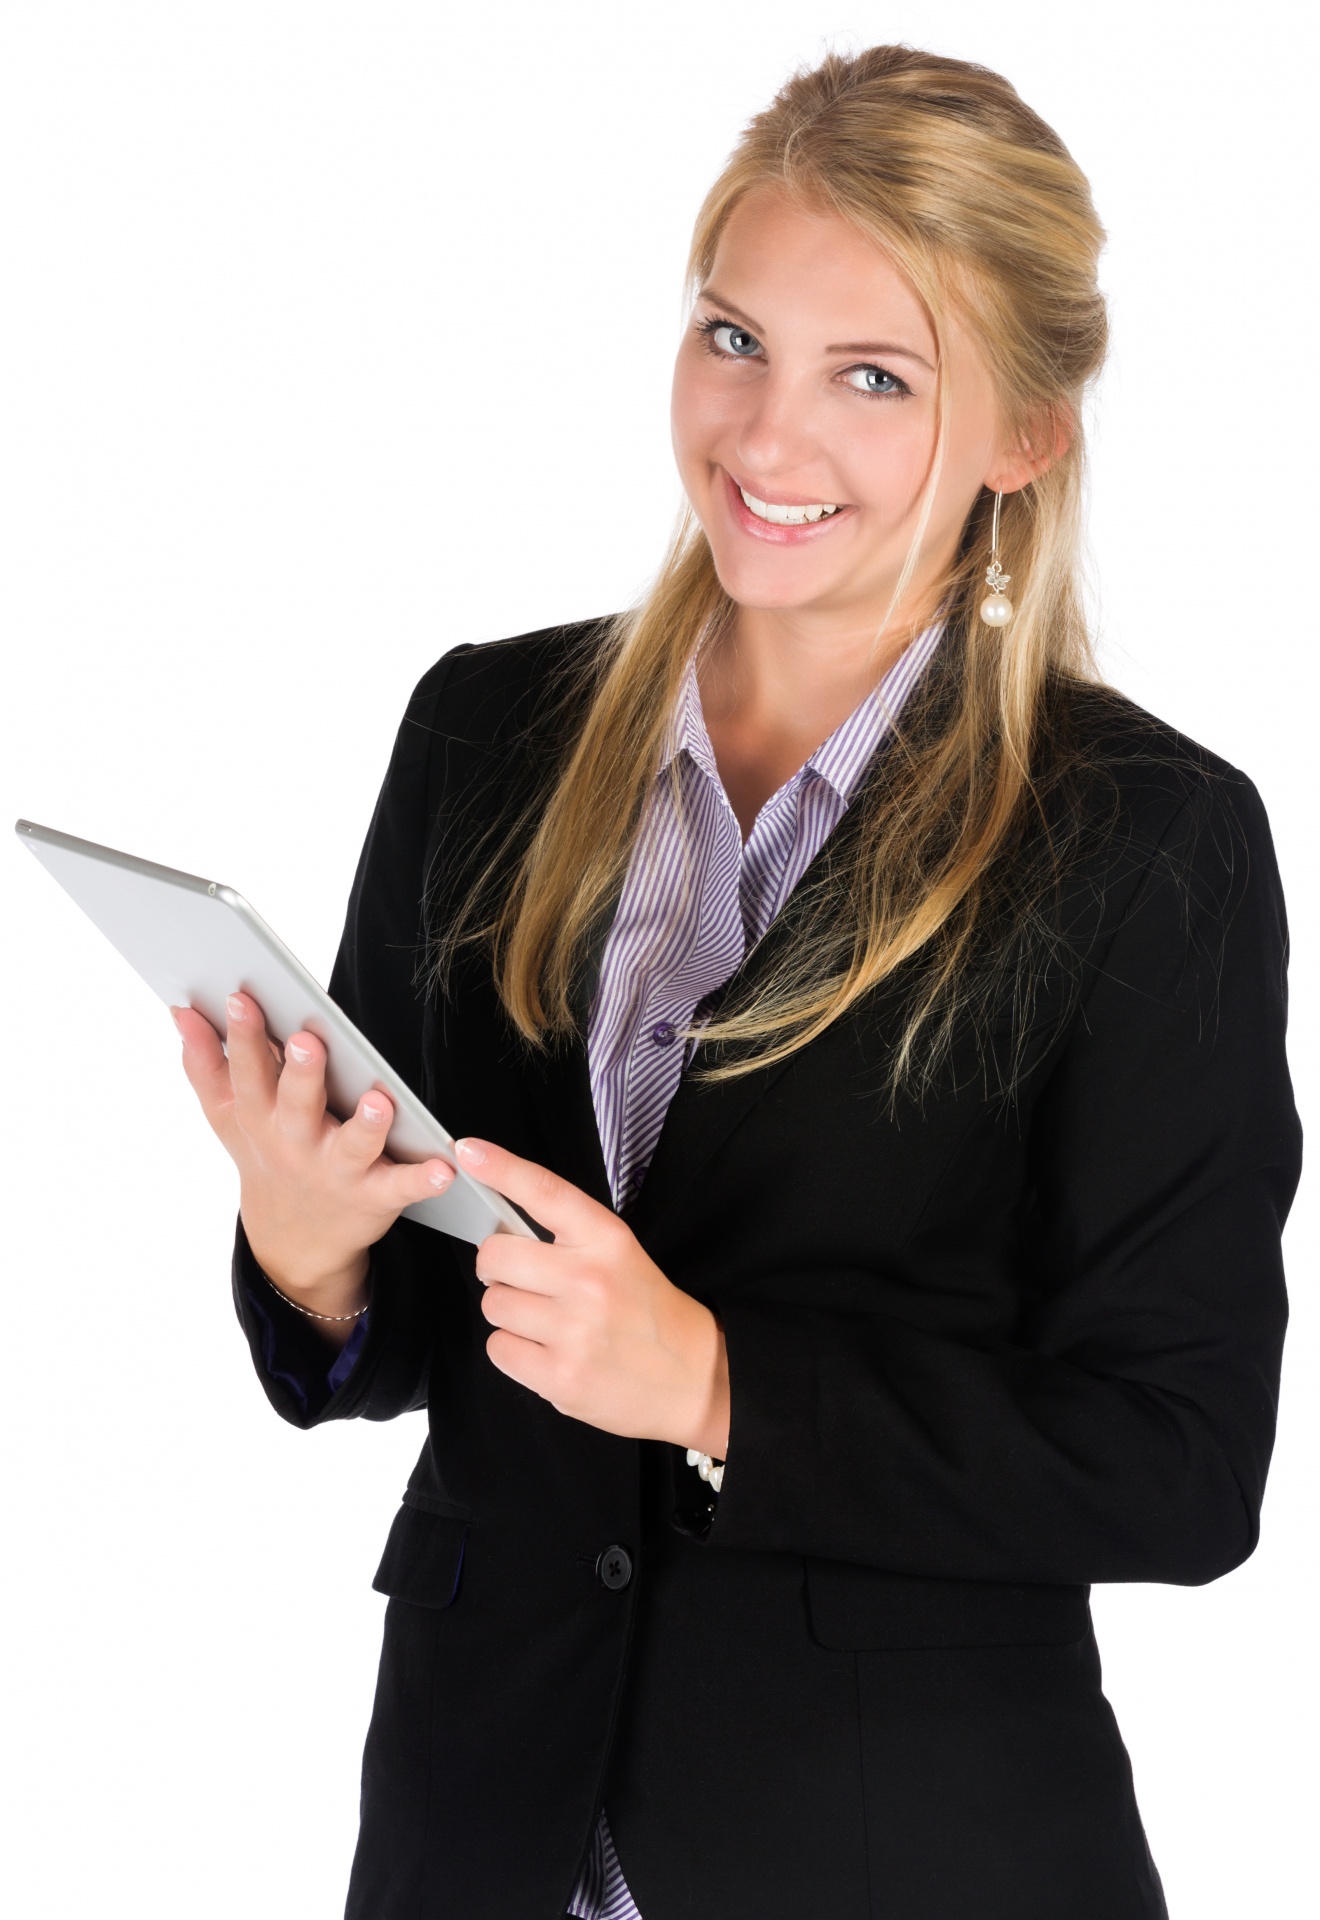 Businesswoman Holding A Tablet